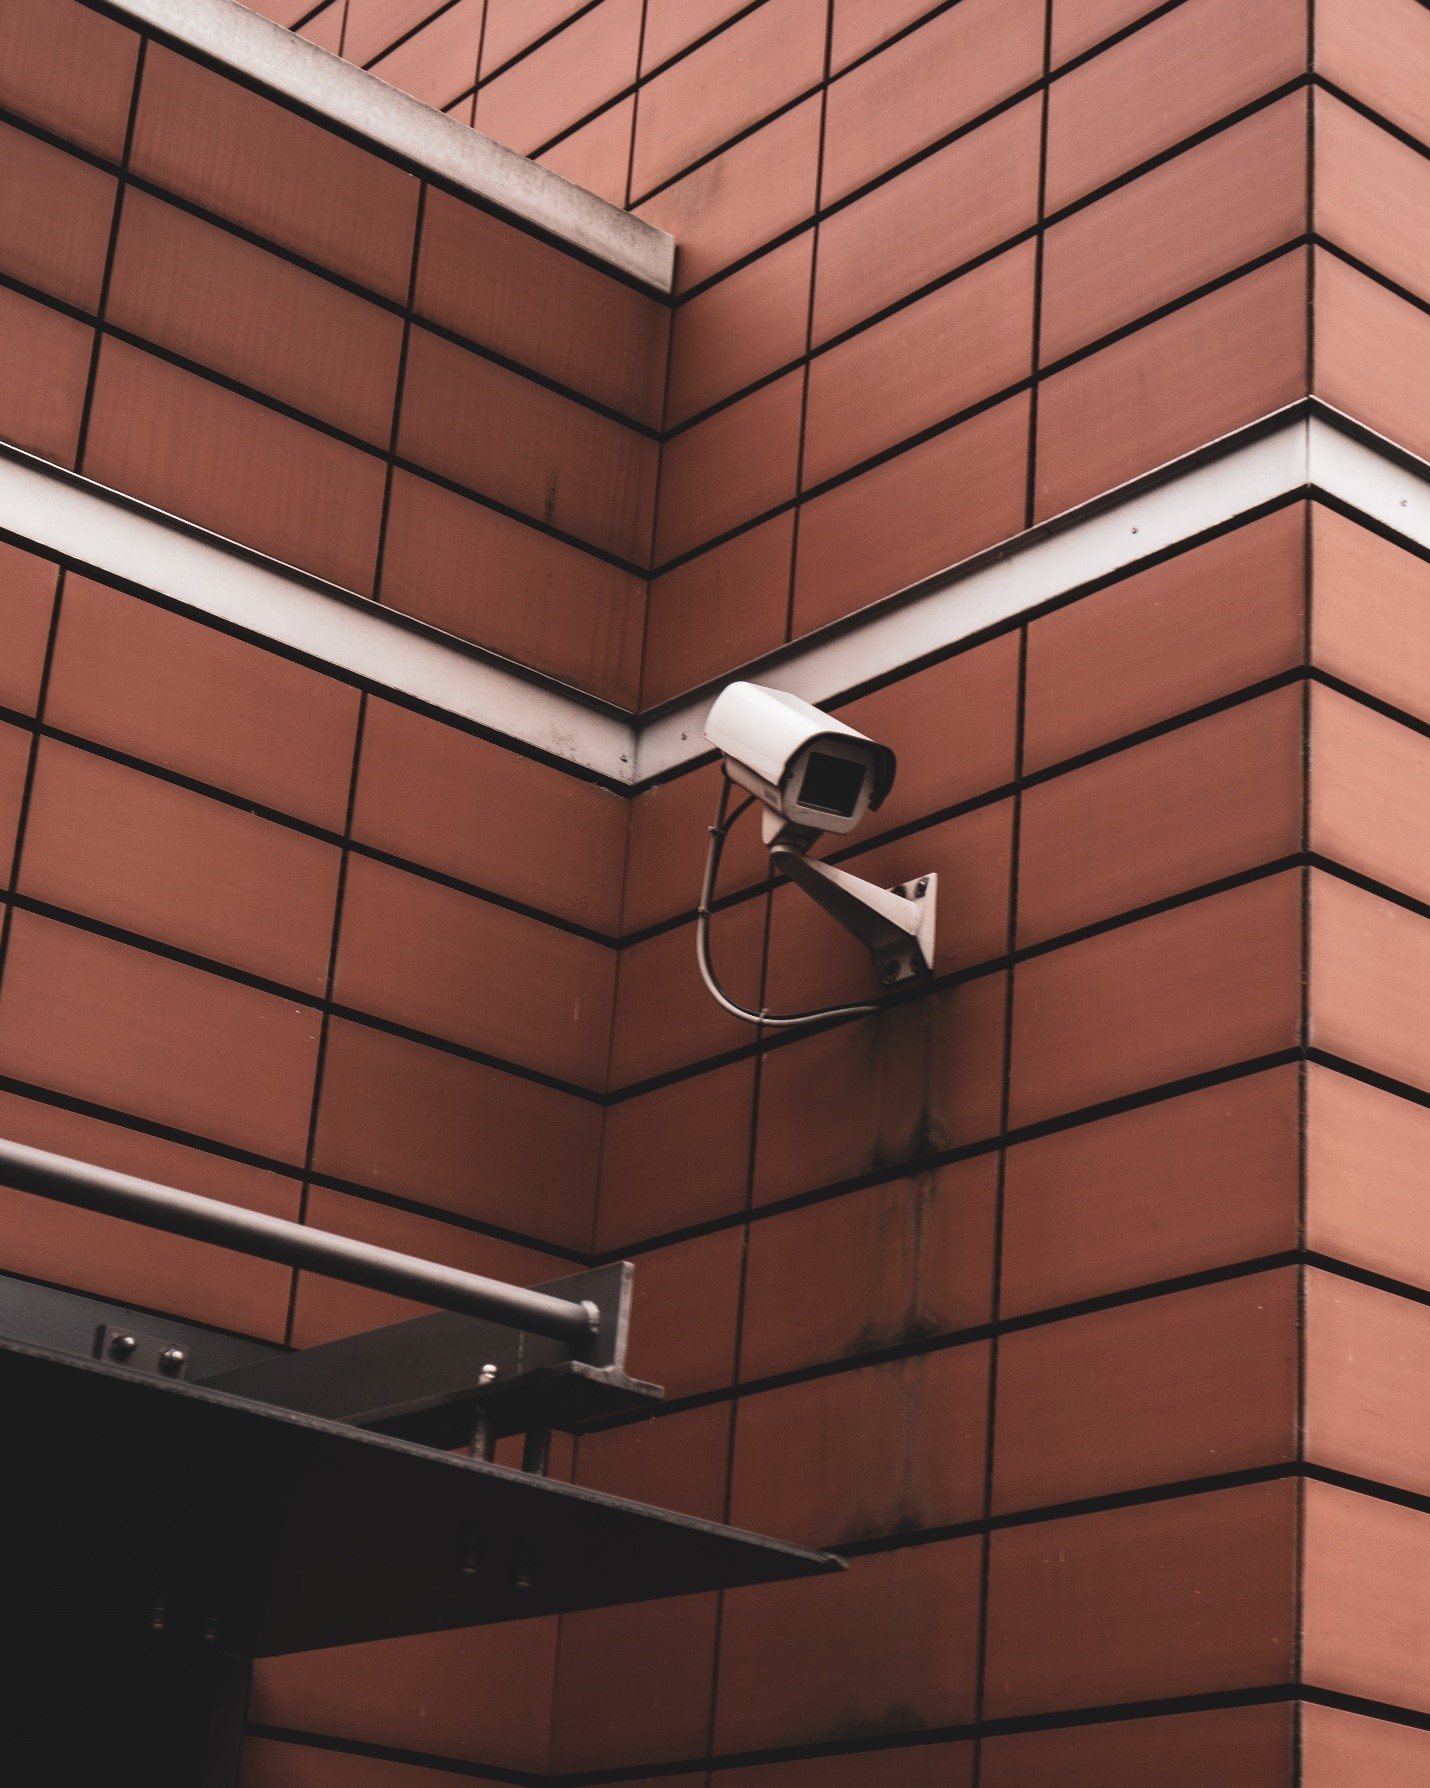  Importance of Live Security Camera Monitoring